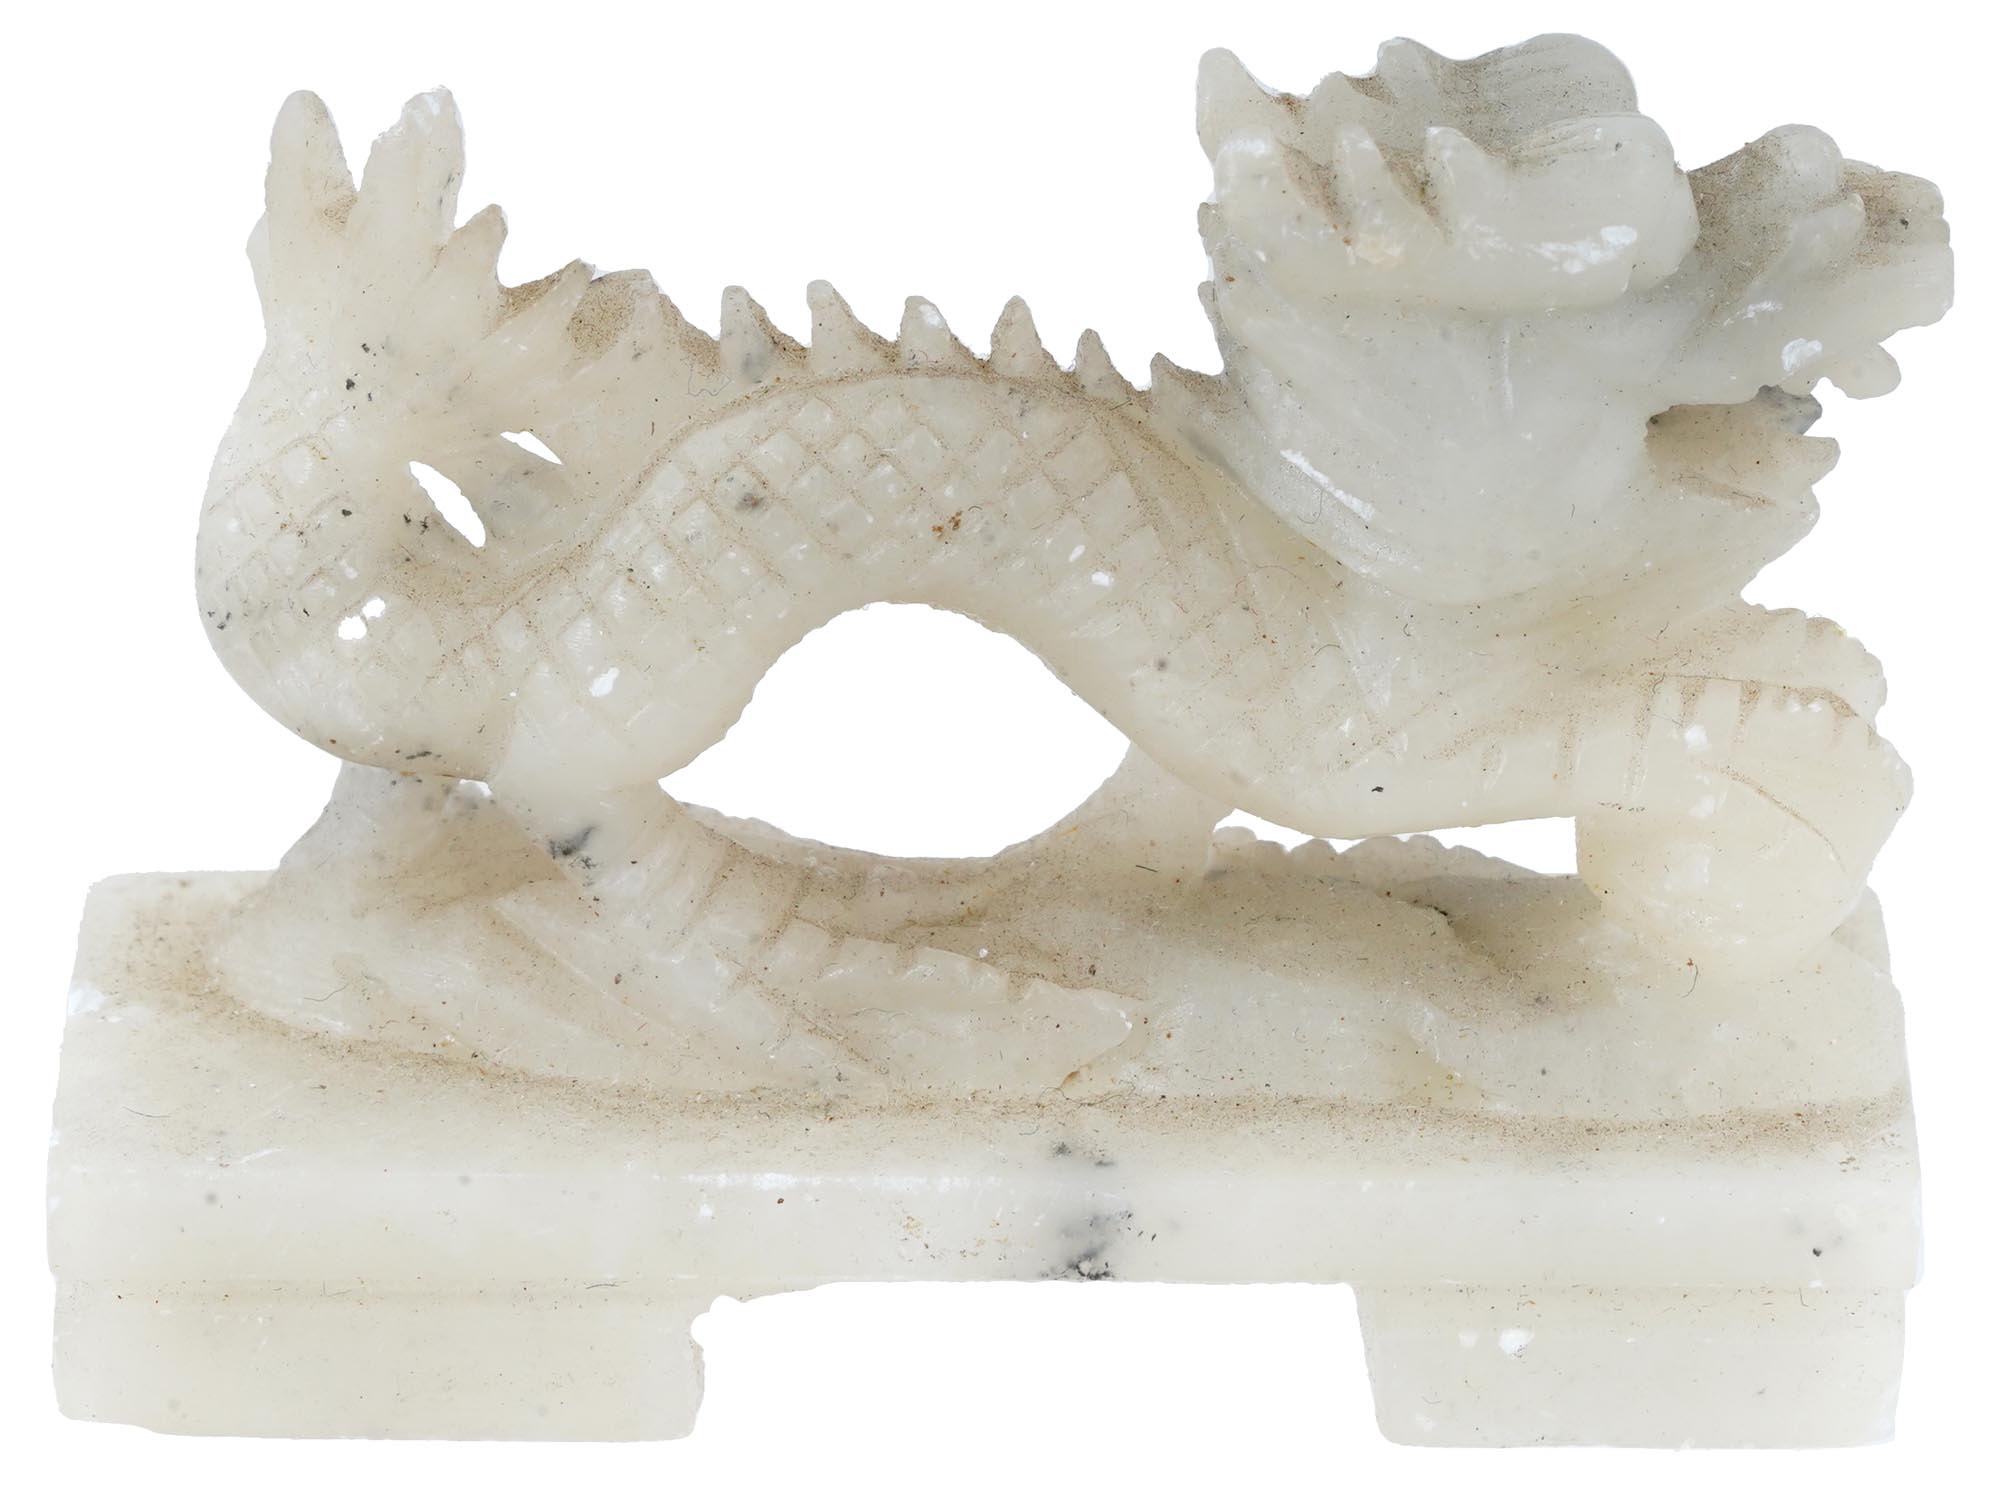 ANTIQUE CHINESE CARVED JADE DRAGON FIGURINE PIC-3